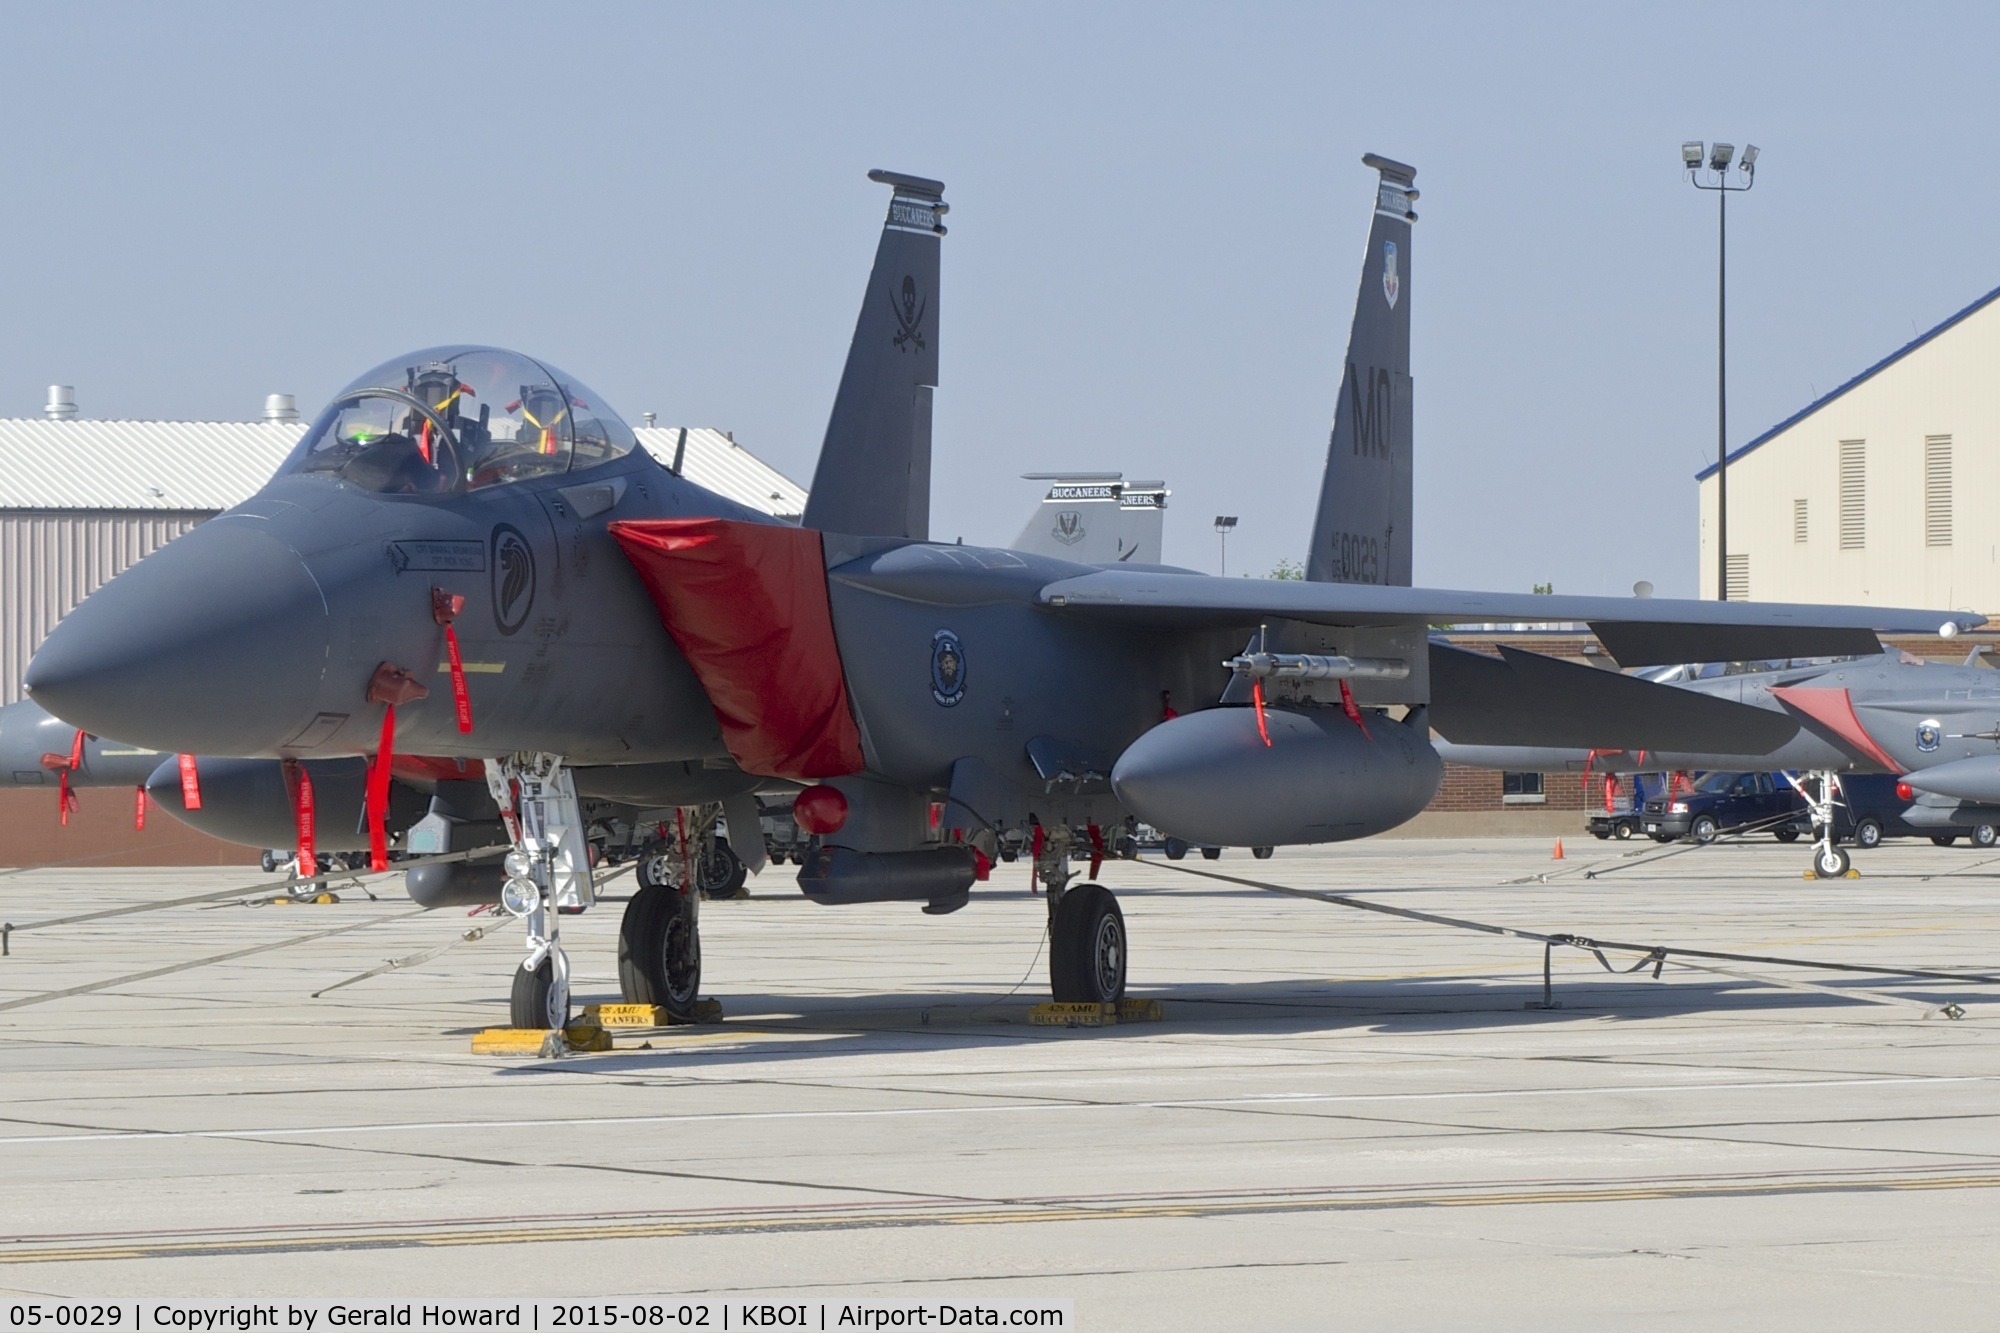 05-0029, 2005 Boeing F-15SG Strike Eagle C/N SG29, Parked on Idaho ANG ramp. 428th Fighter Sq. 